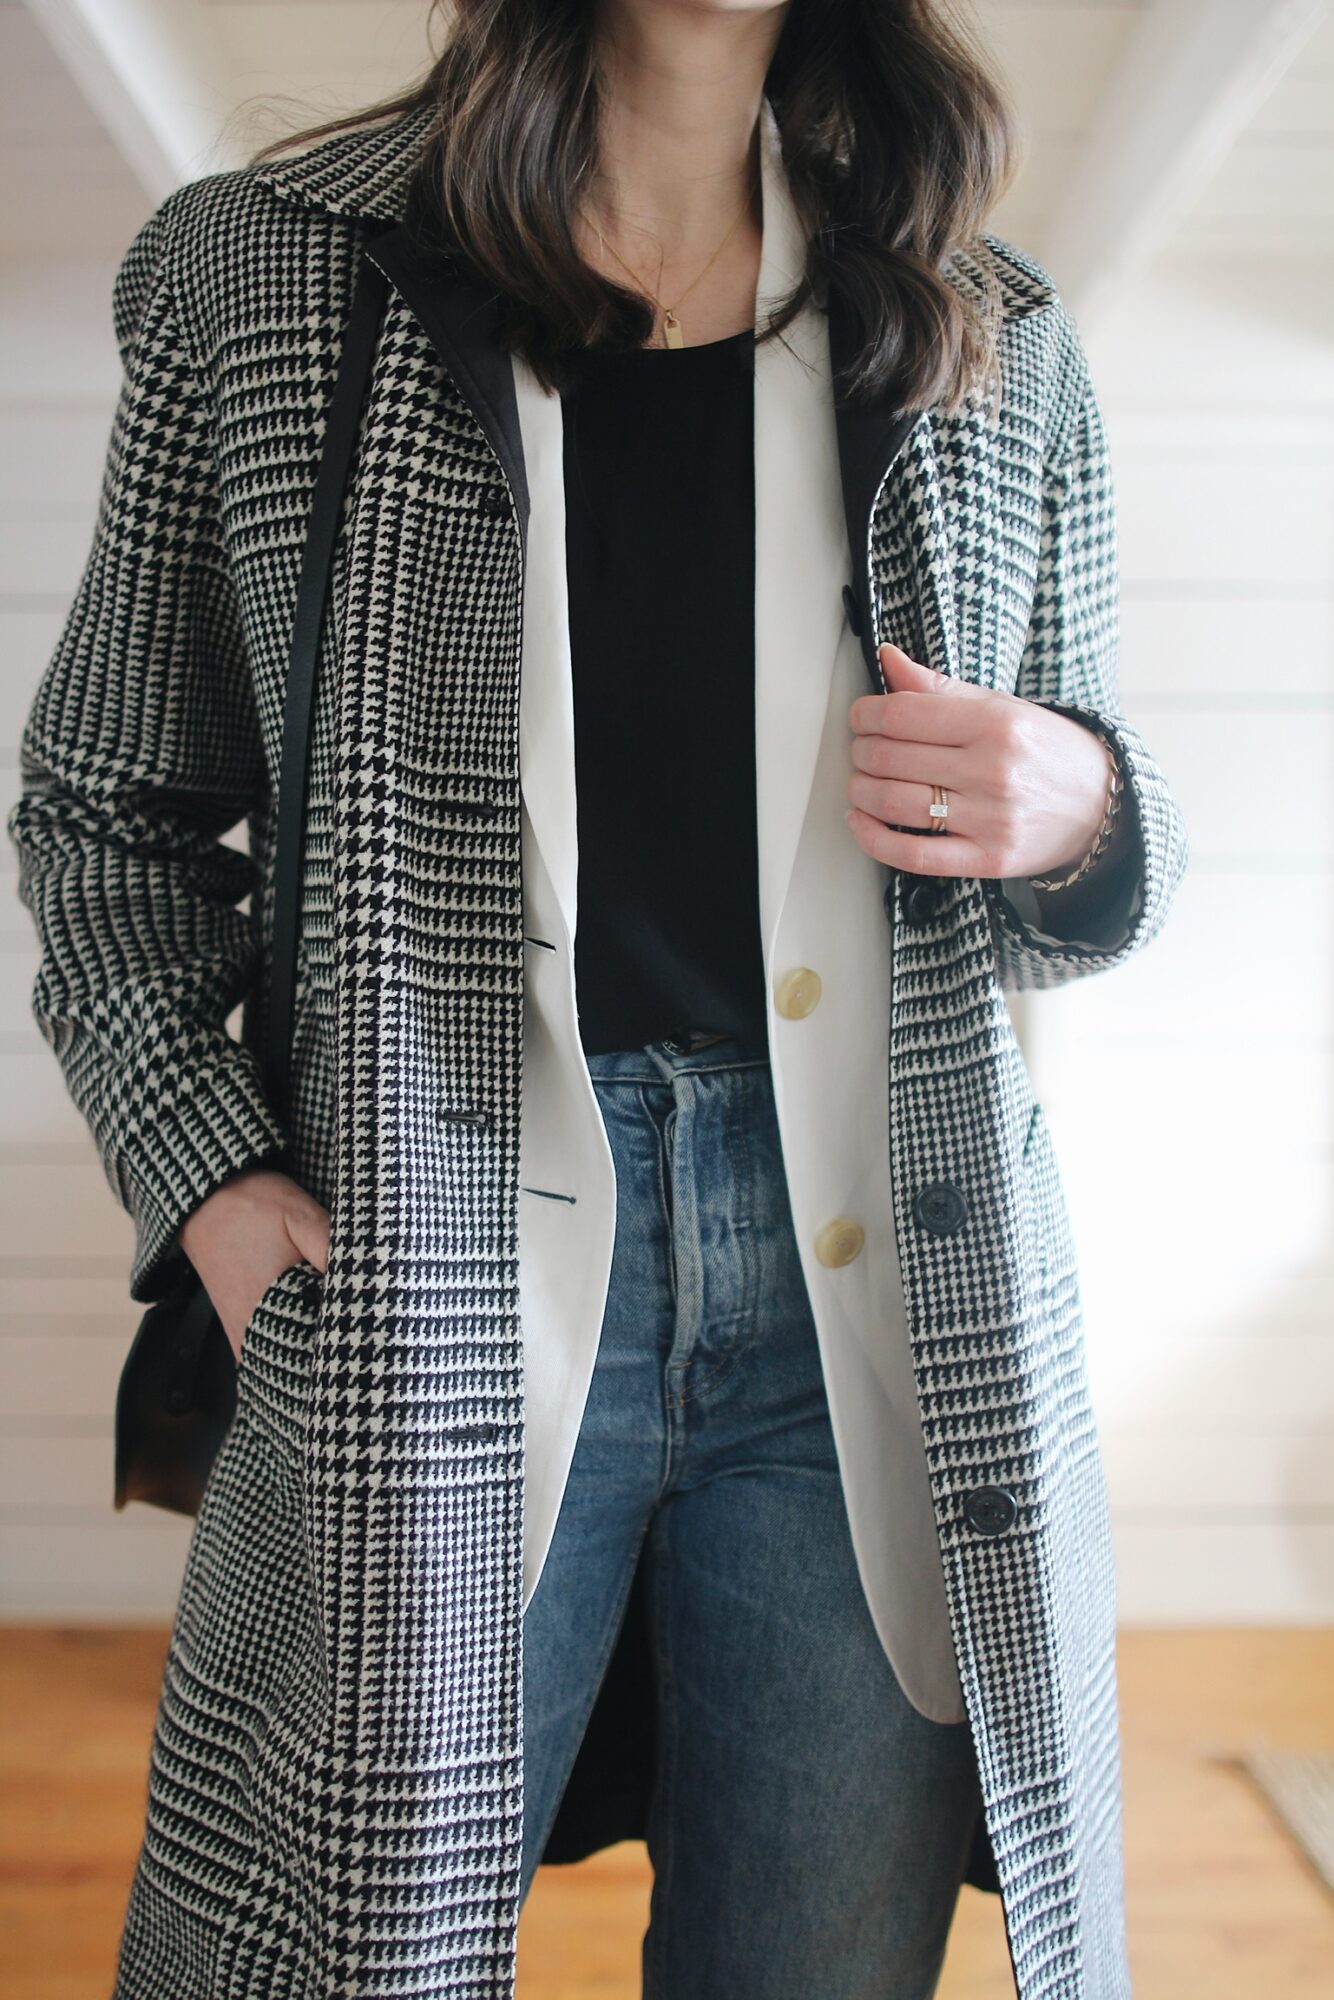 STYLE BEE - HOUNDSTOOTH COAT, WHITE BLAZER, BLUE JEANS AND BLACK ACCENTS